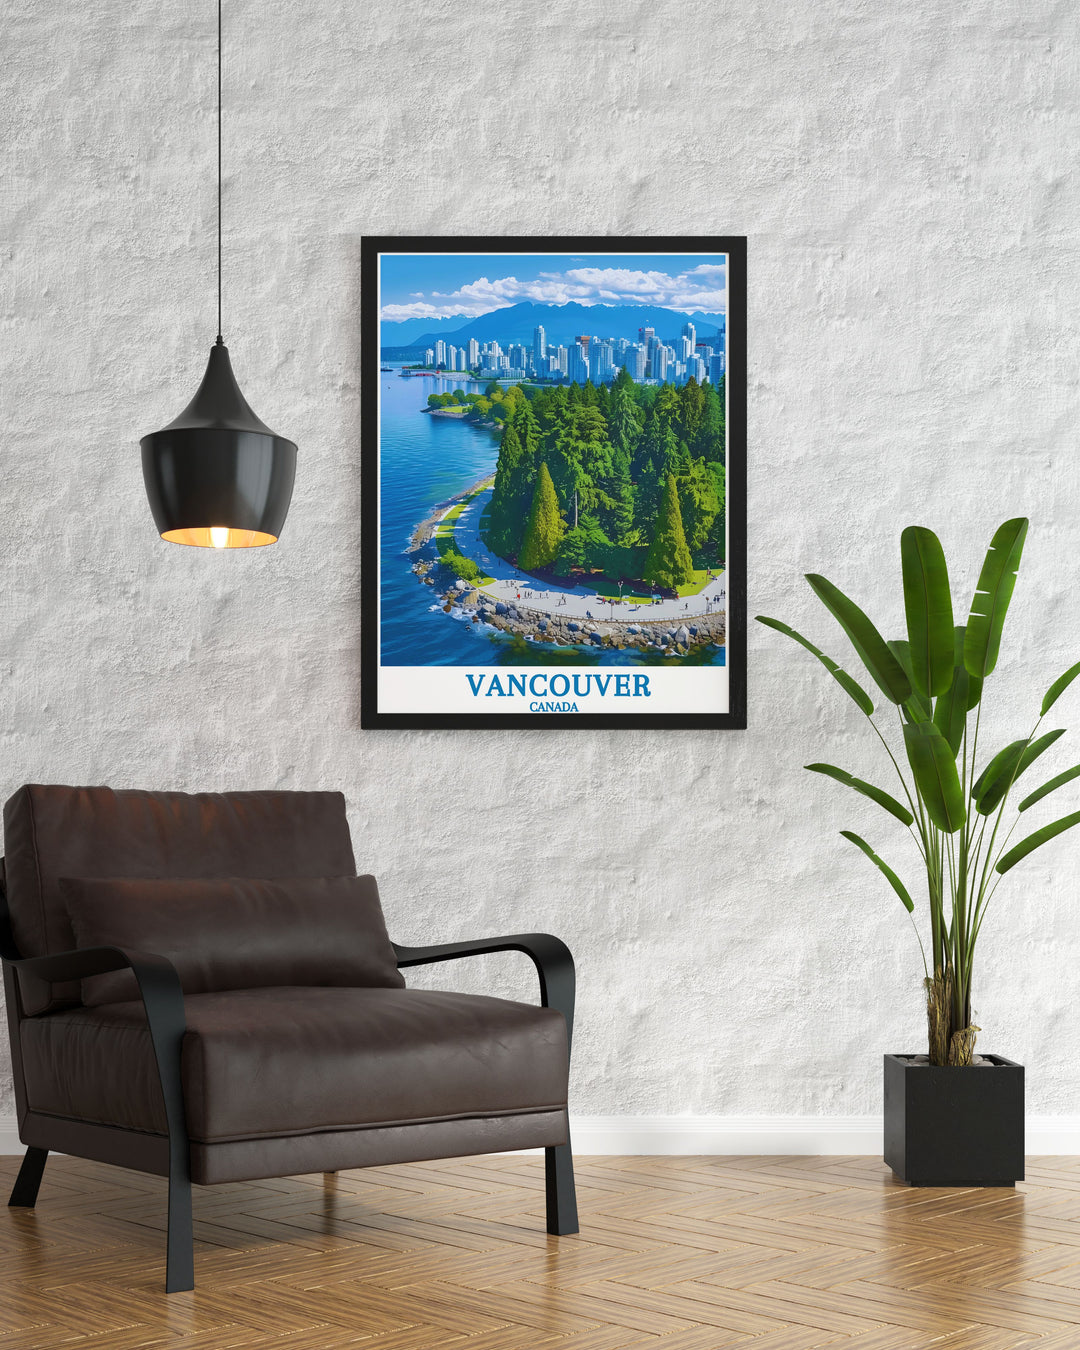 Transform your living space with the tranquil beauty of Stanley Park. This artwork showcases the parks lush forests, diverse wildlife, and scenic trails, perfect for adding a touch of nature and elegance to your home decor.